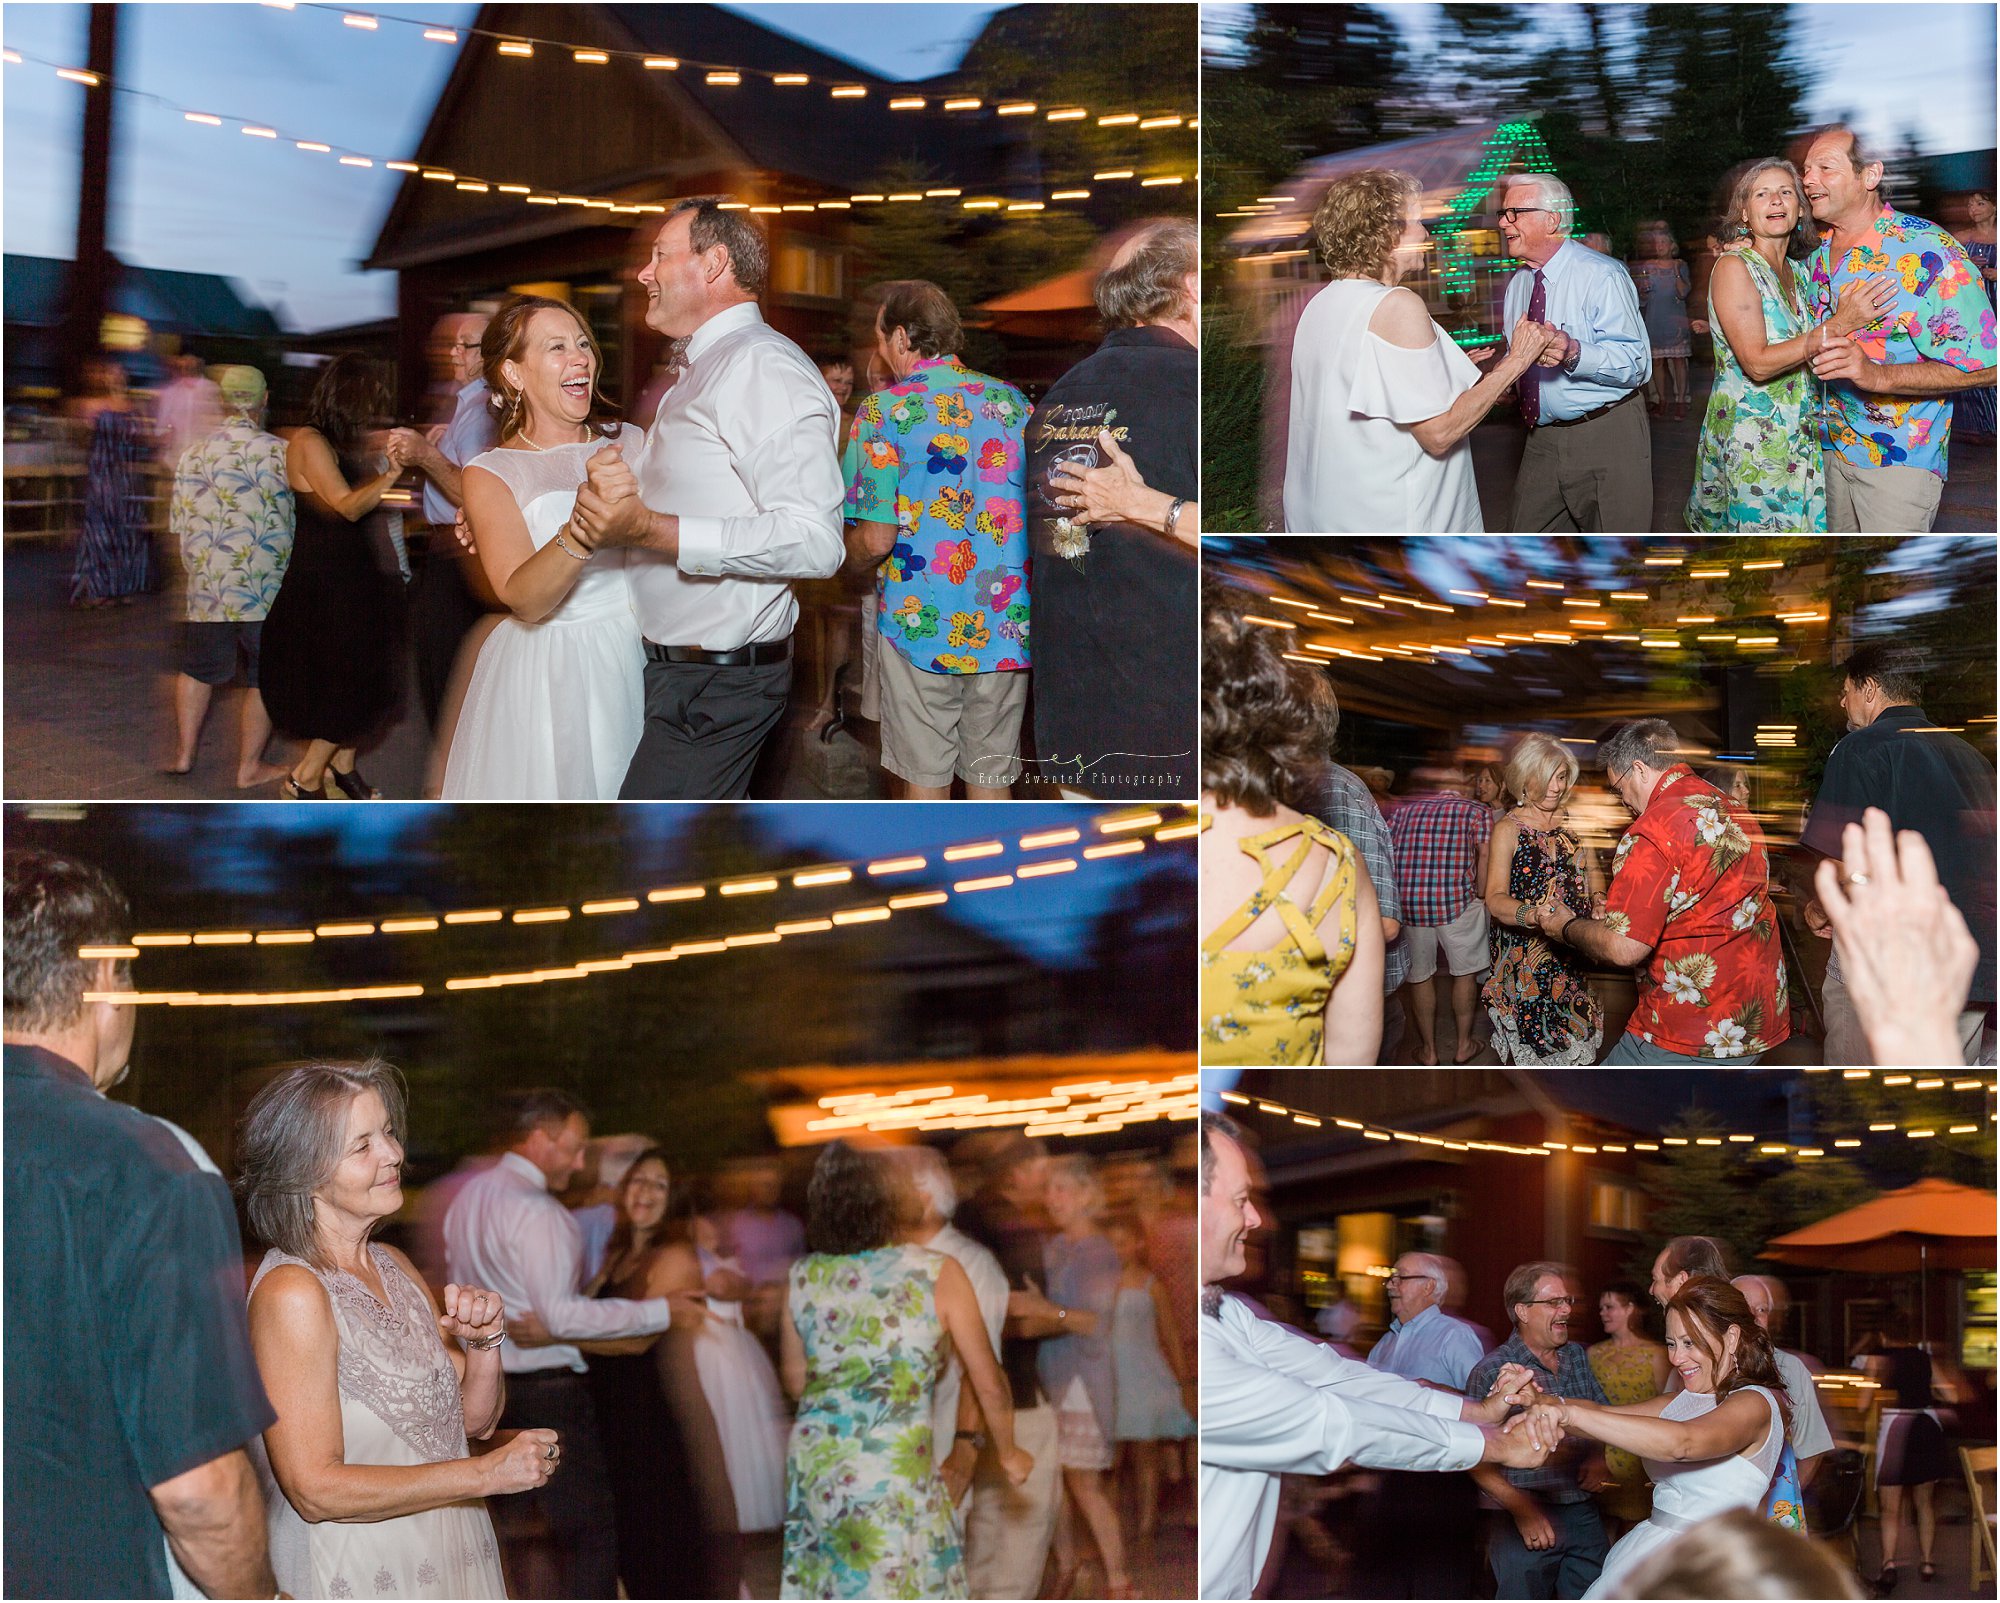 Guests at an outdoor wedding reception at the Open Door Wine Bar dance to the sounds of Sisters, Oregon based band Doc Ryan & The Wychus Creek Band. Photographed by Bend wedding photographer Erica Swantek Photography.